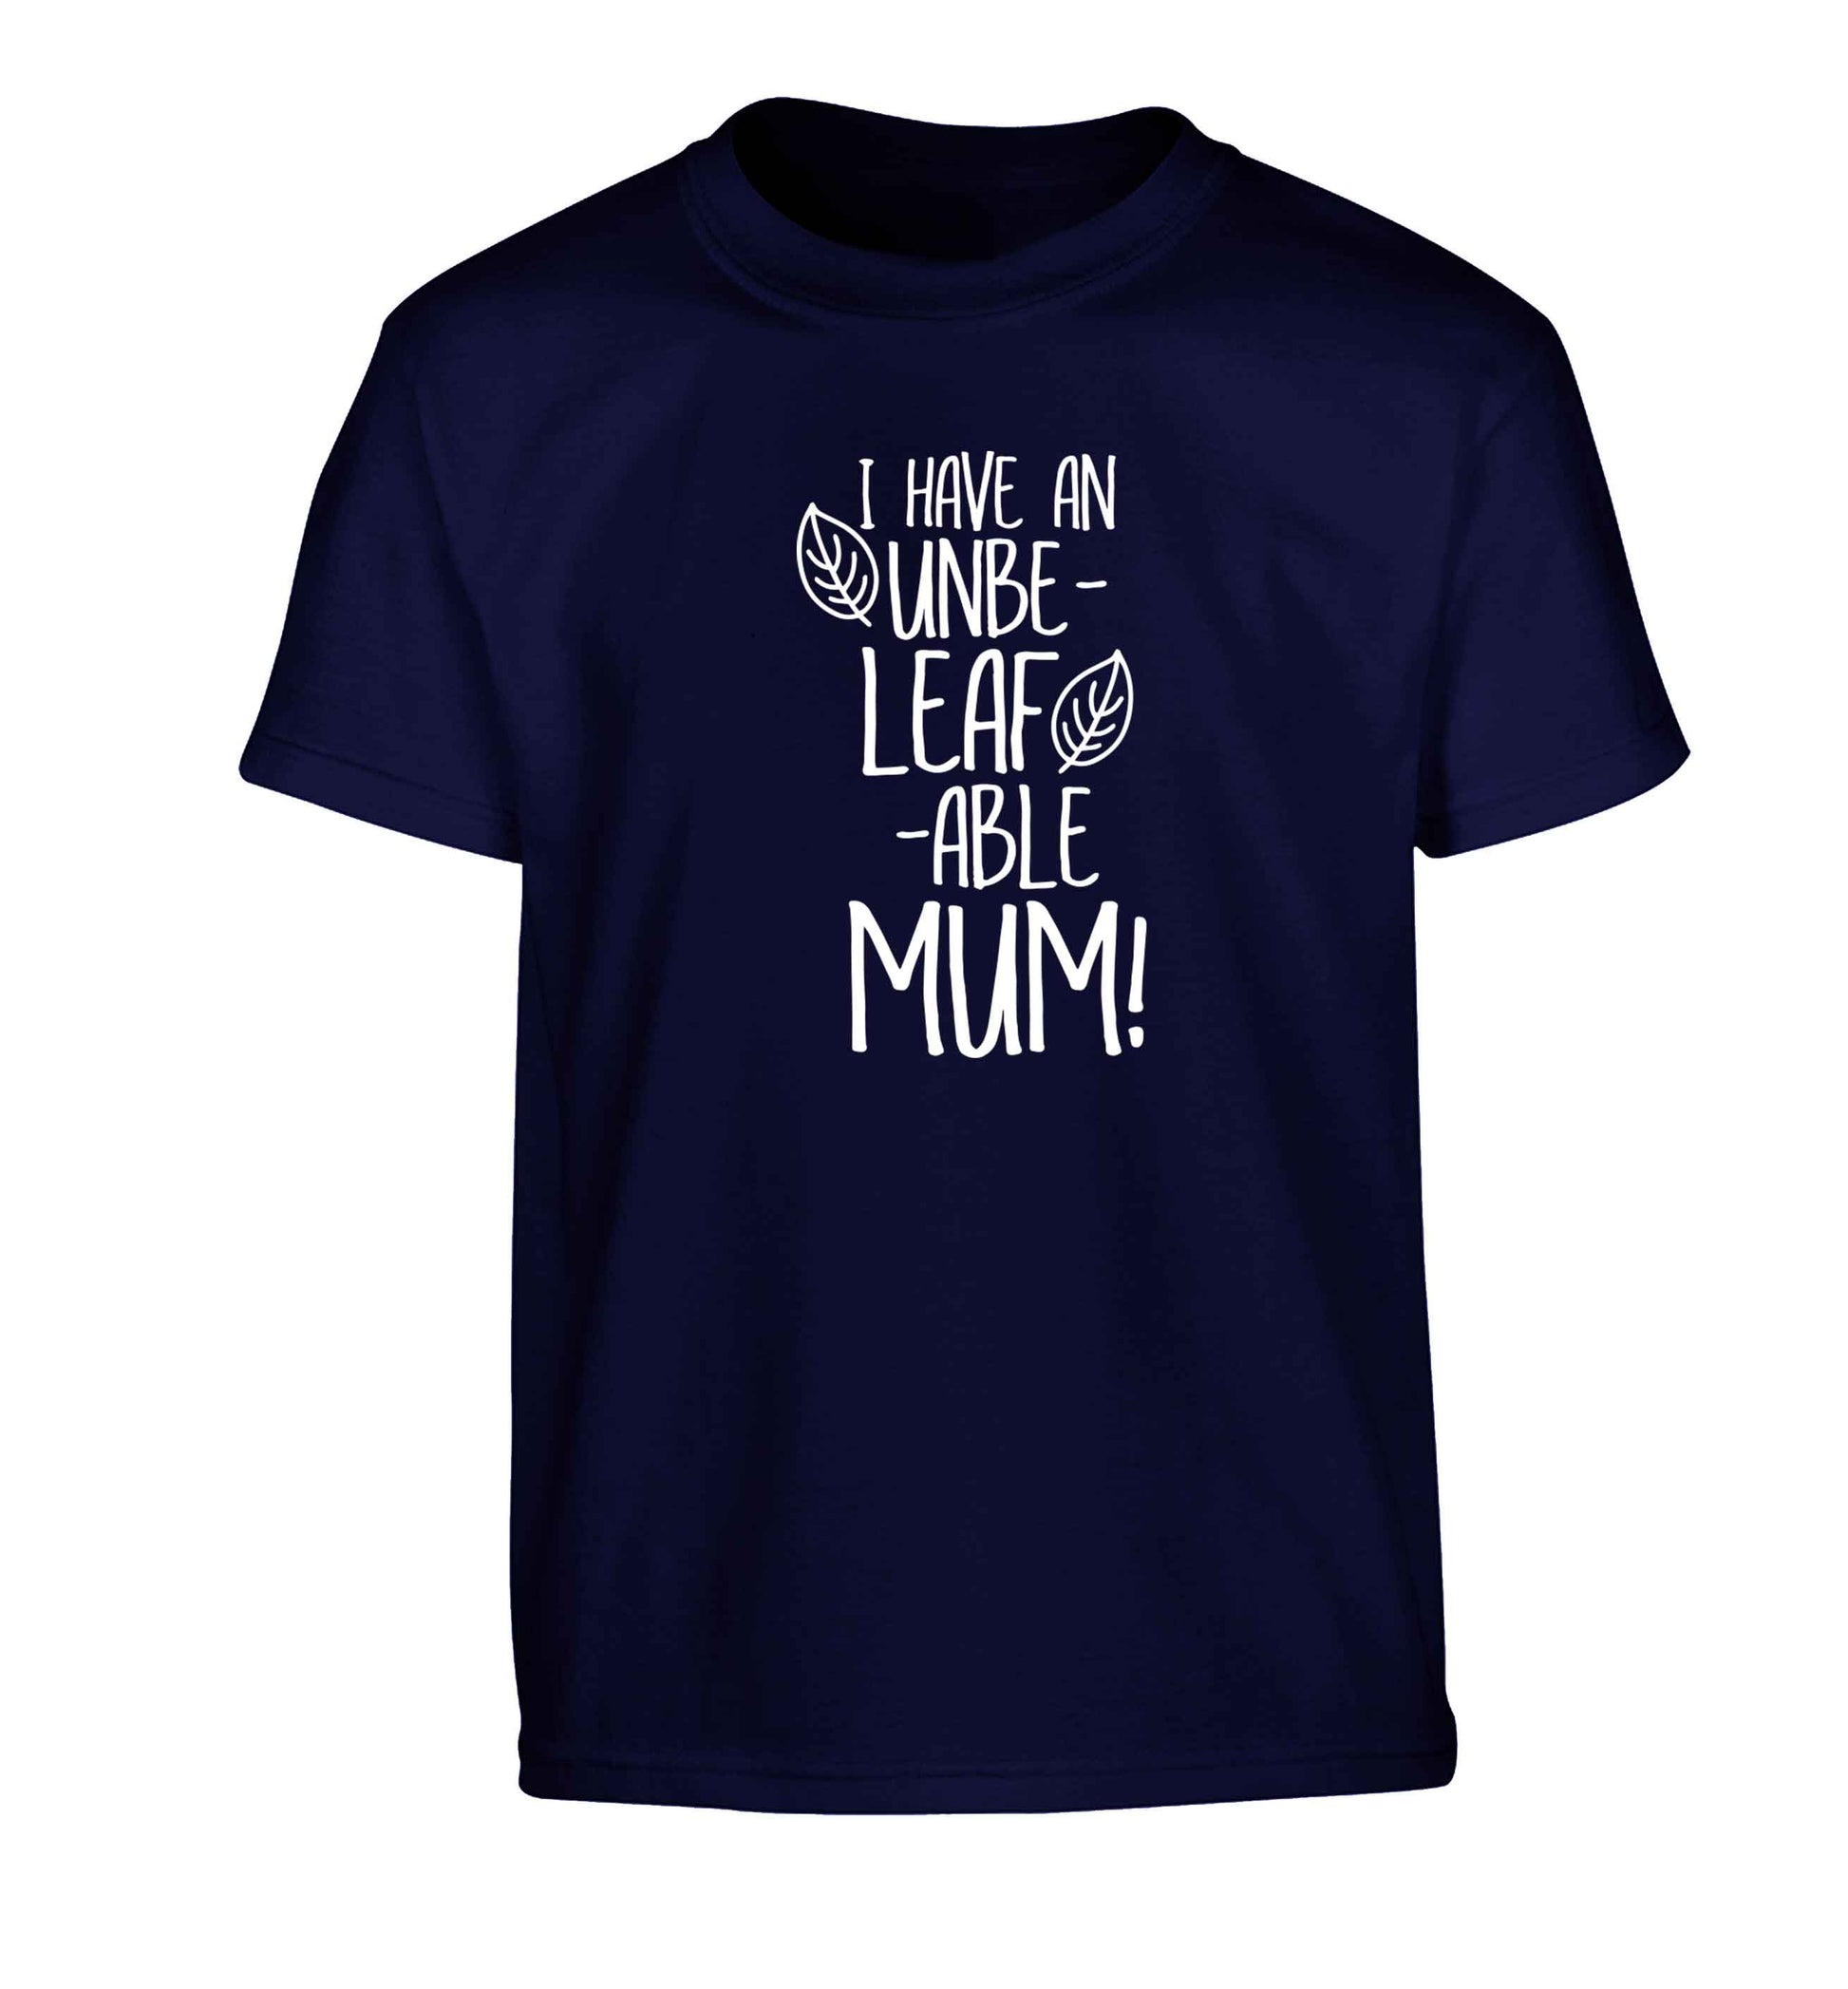 I have an unbeleafable mum! Children's navy Tshirt 12-13 Years